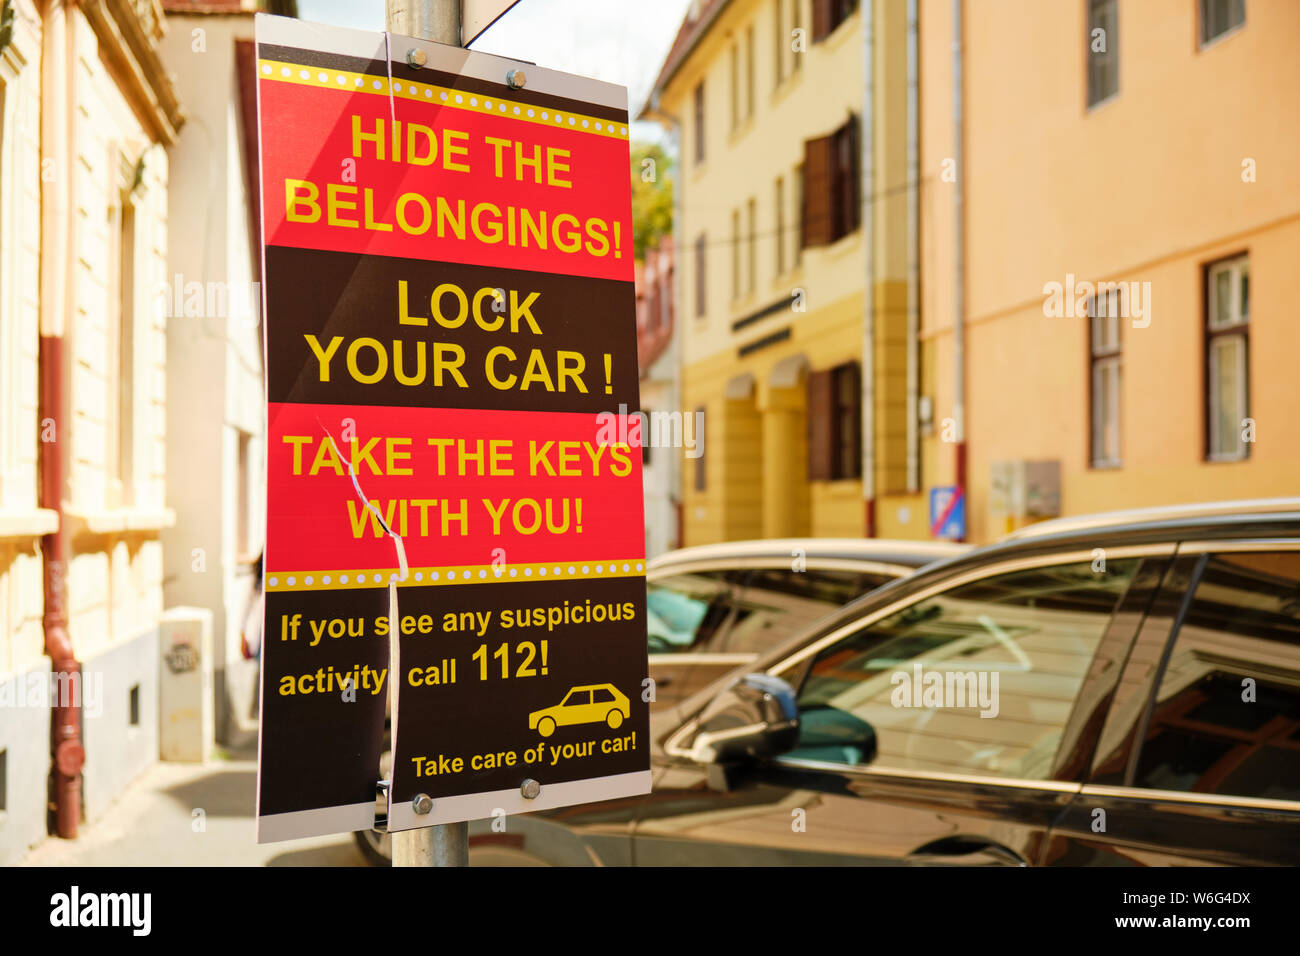 Sibiu, Romania - July 11, 2019: Warning sign for car drivers to protect their car and belongings against thieves. Copy-space on the right. Stock Photo